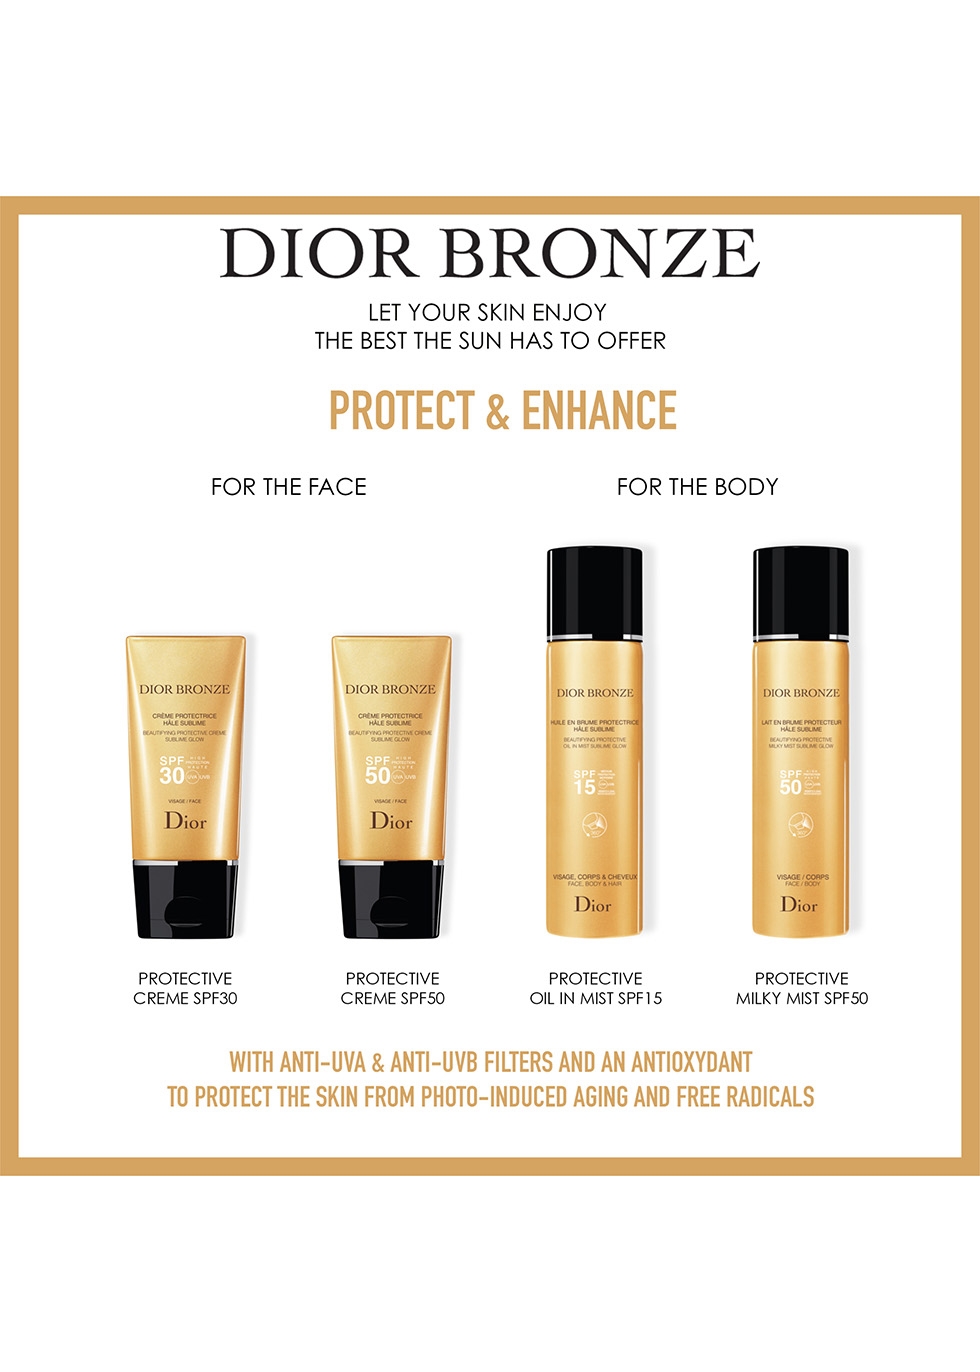 dior bronze beautifying protective creme sublime glow spf 30